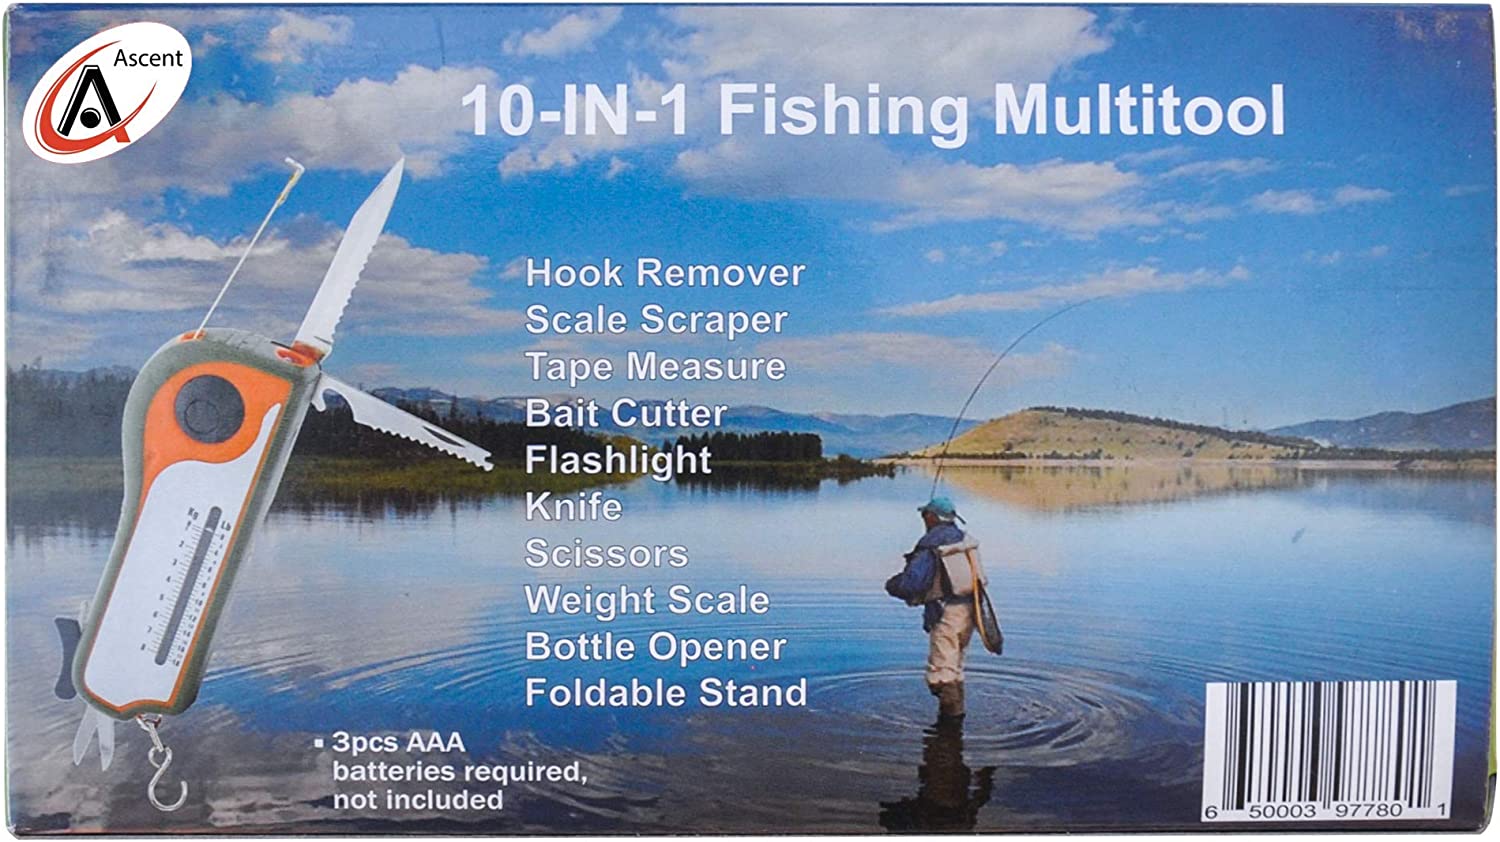 Fishing just got a lot easier with this 10-in-1 fishing multi-tool